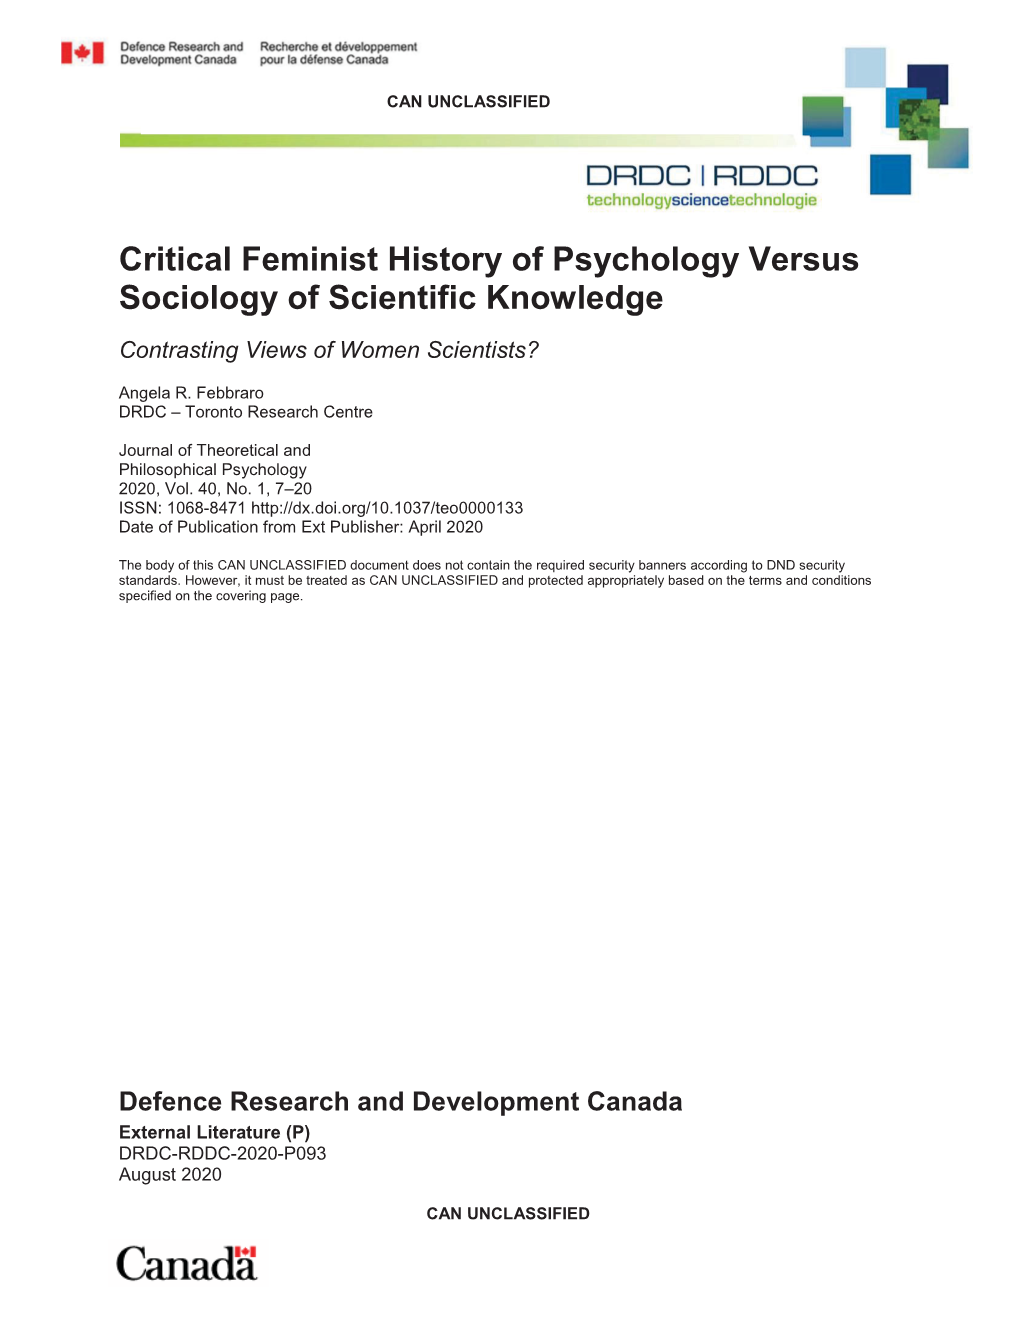 Critical Feminist History of Psychology Versus Sociology of Scientific Knowledge